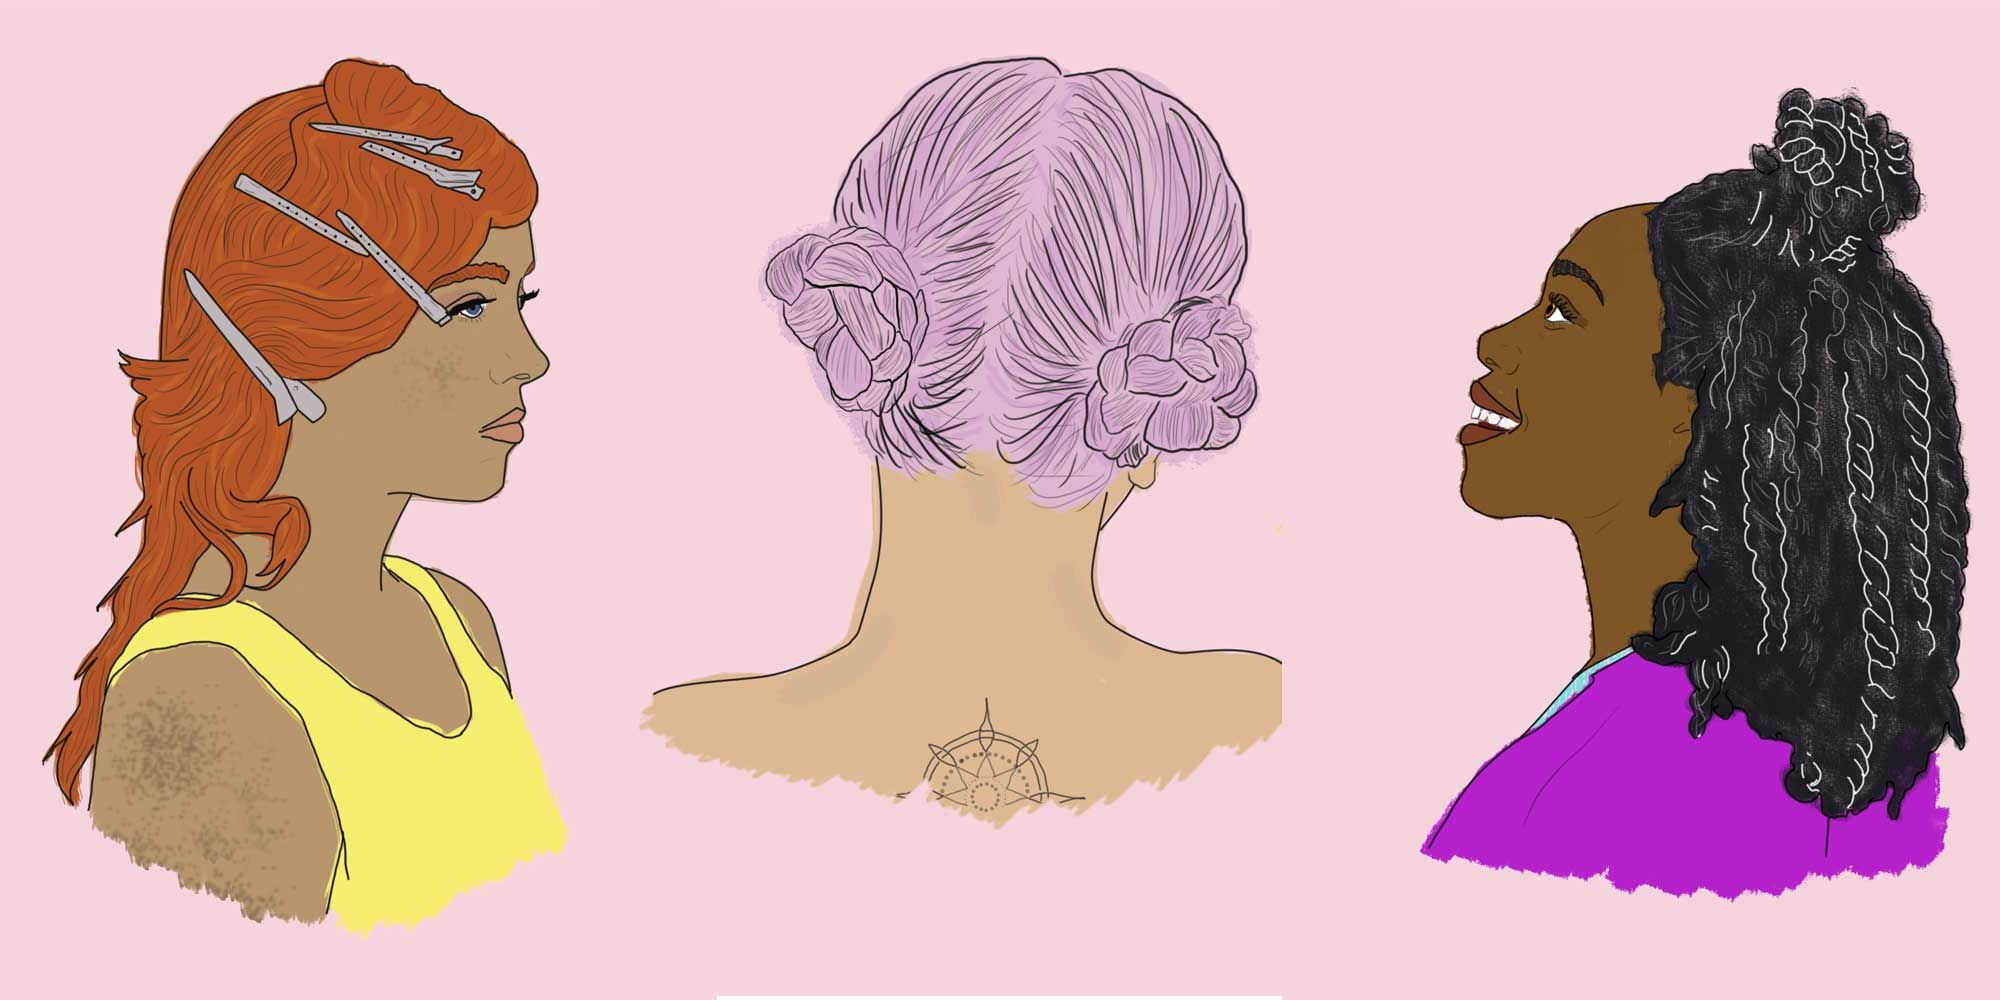 How To Air Dry Hair The Right Way According To Your Hair Type